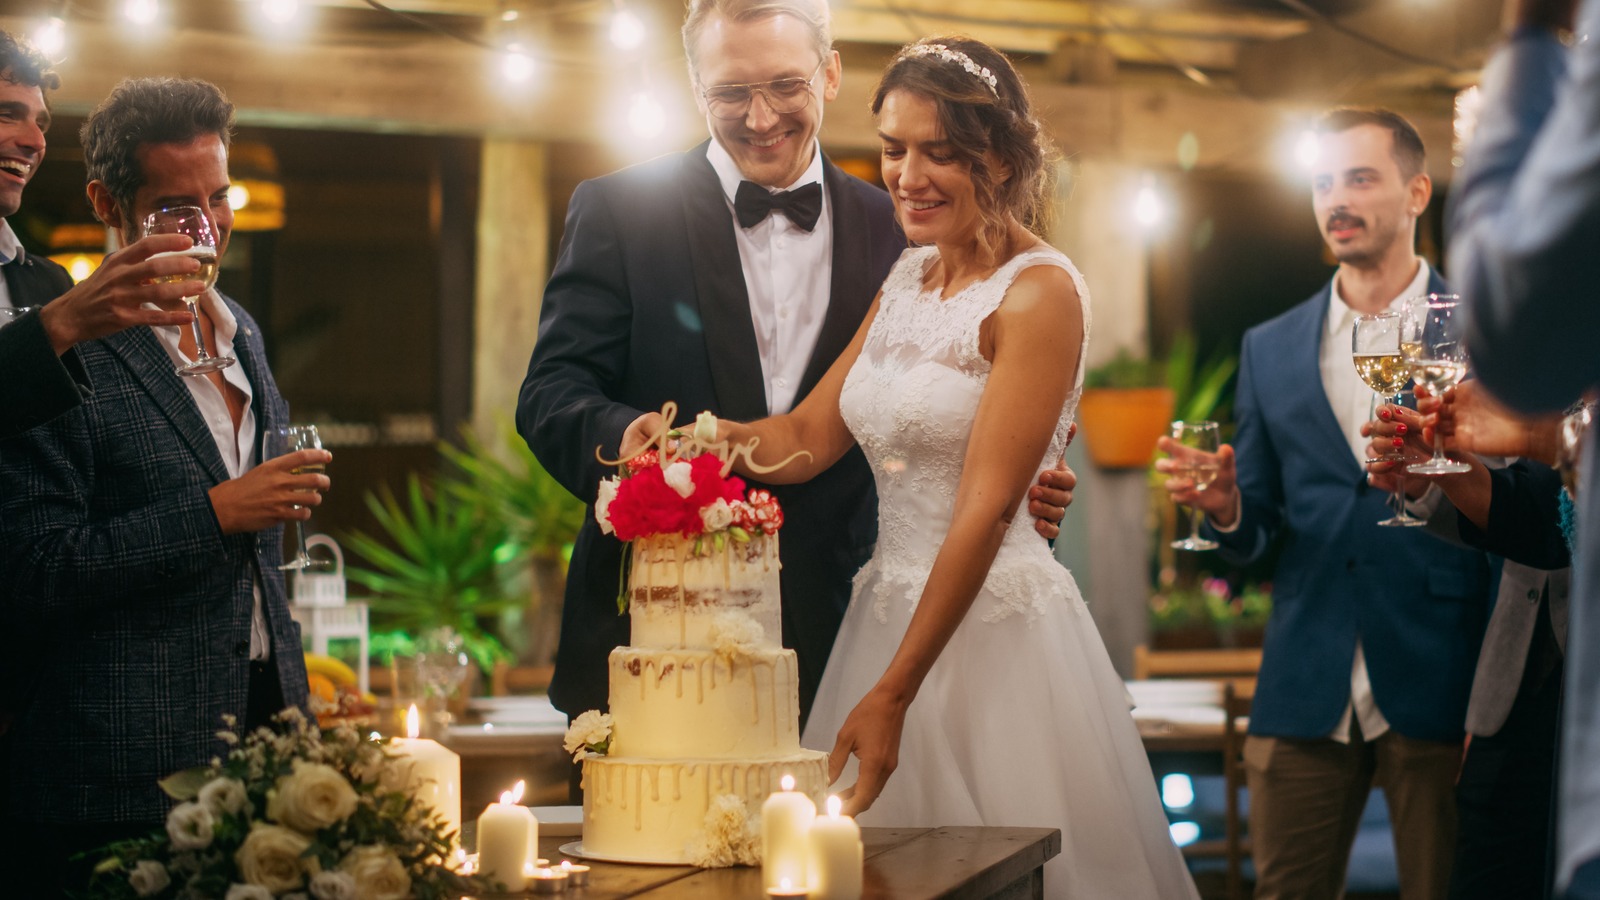 Are Fake Wedding Cakes A Thing Now? - Mashed